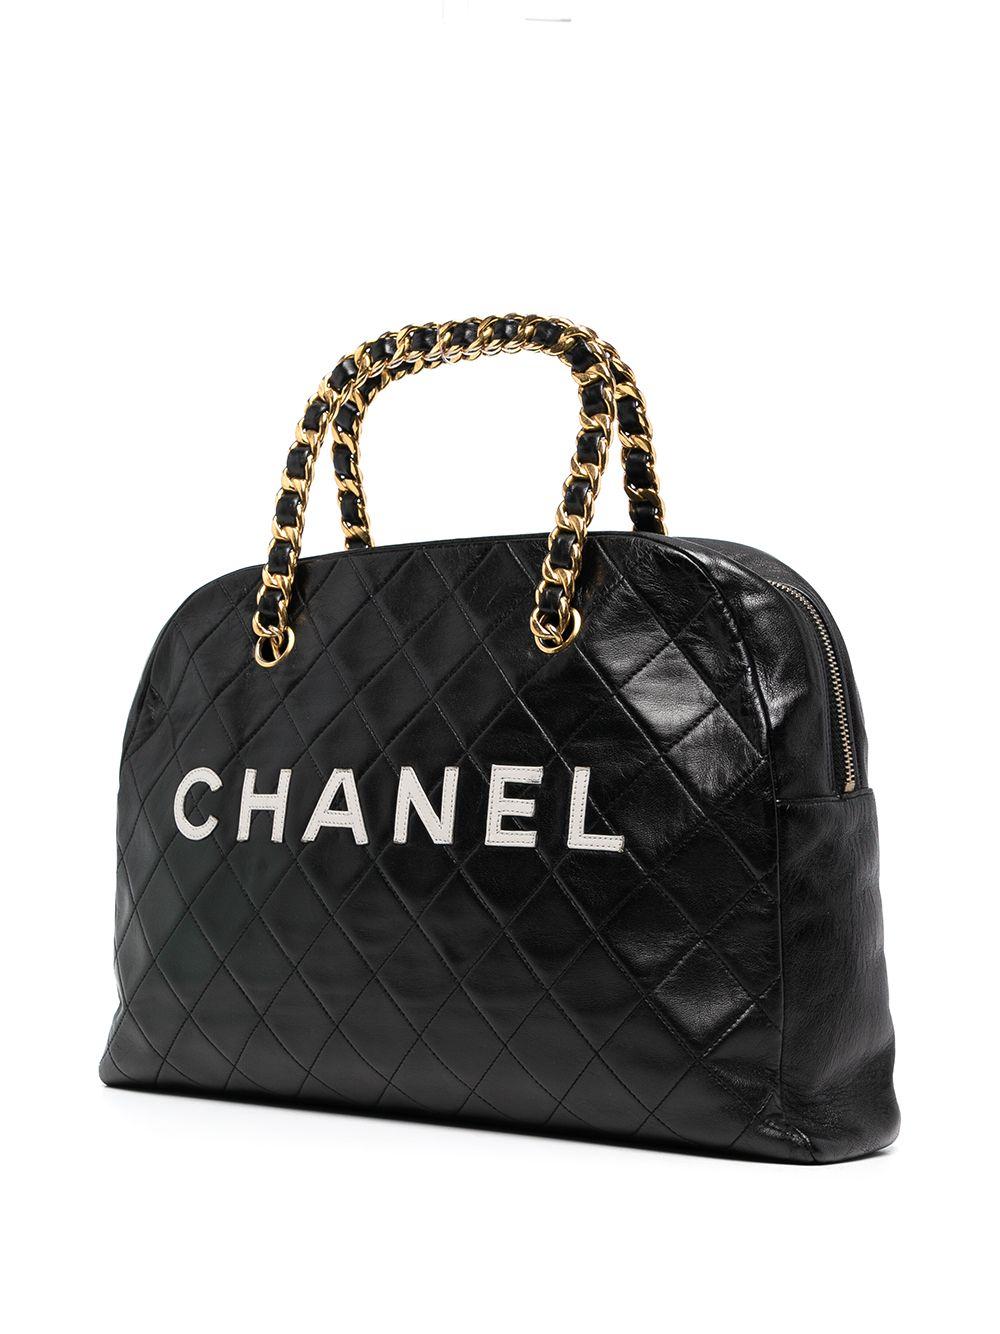 Chanel Vintage Black Quilted Lambskin Leather Medium Bowling Bag In Good Condition For Sale In Miami, FL